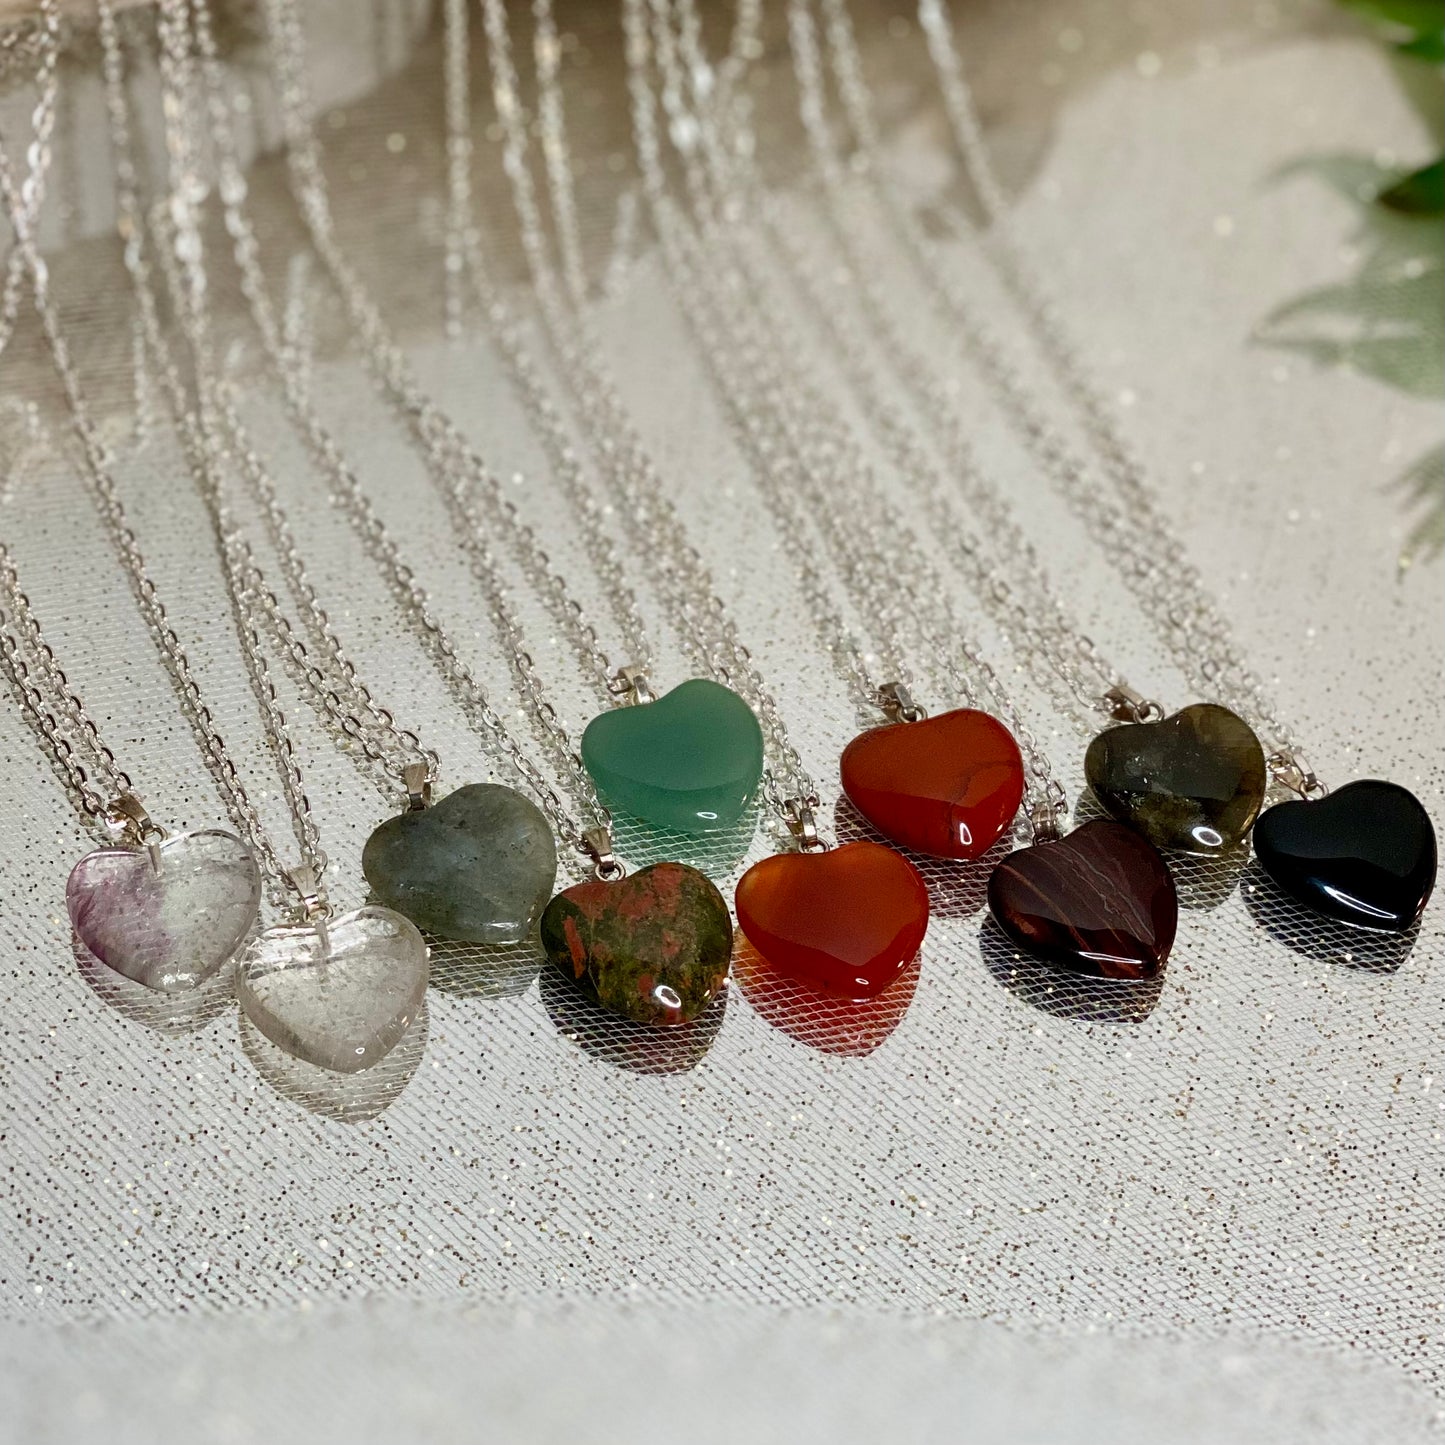 Crystal Heart Harmony Necklace - Crafted for positivity, Adorned for Beauty!